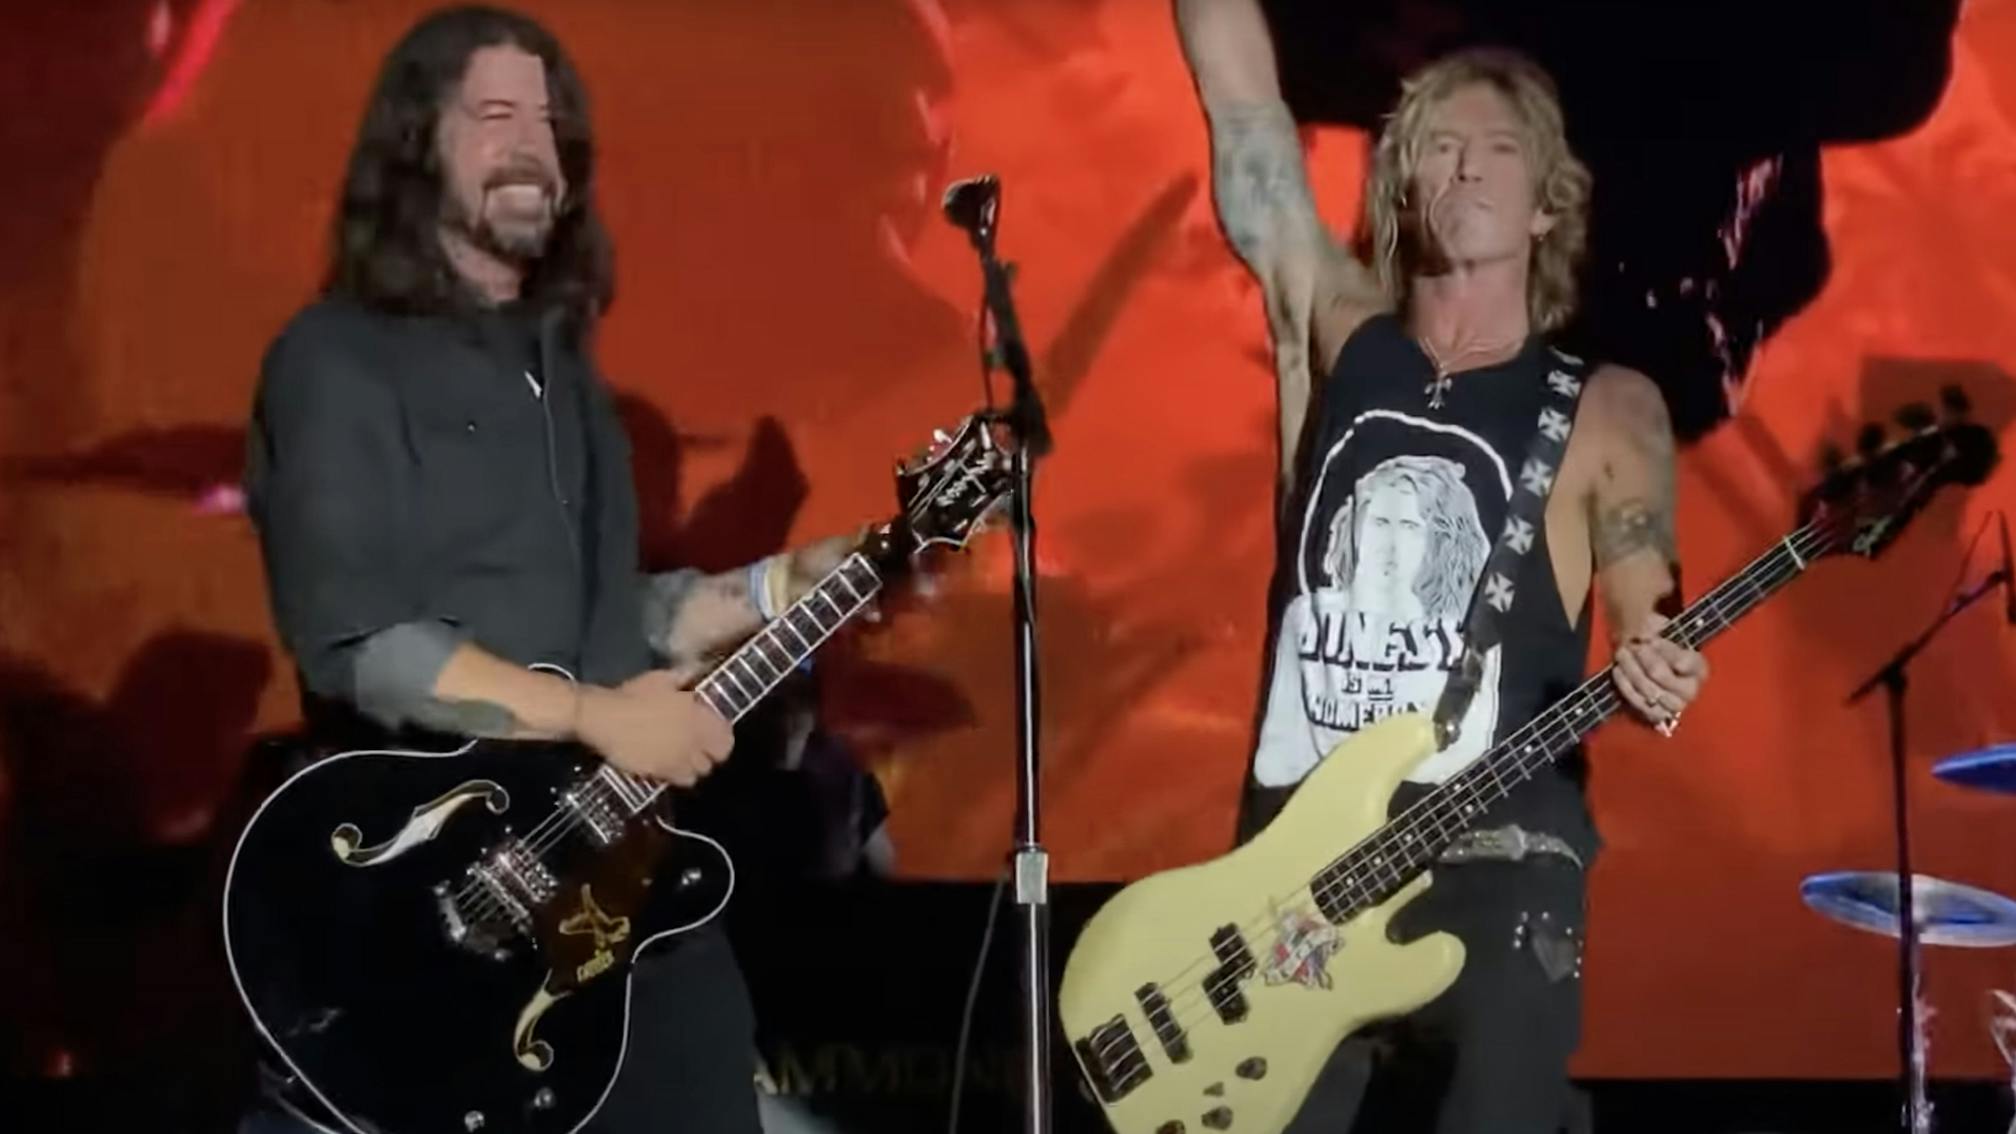 Dave Grohl joins Guns N' Roses onstage, festival cuts set short due to curfew